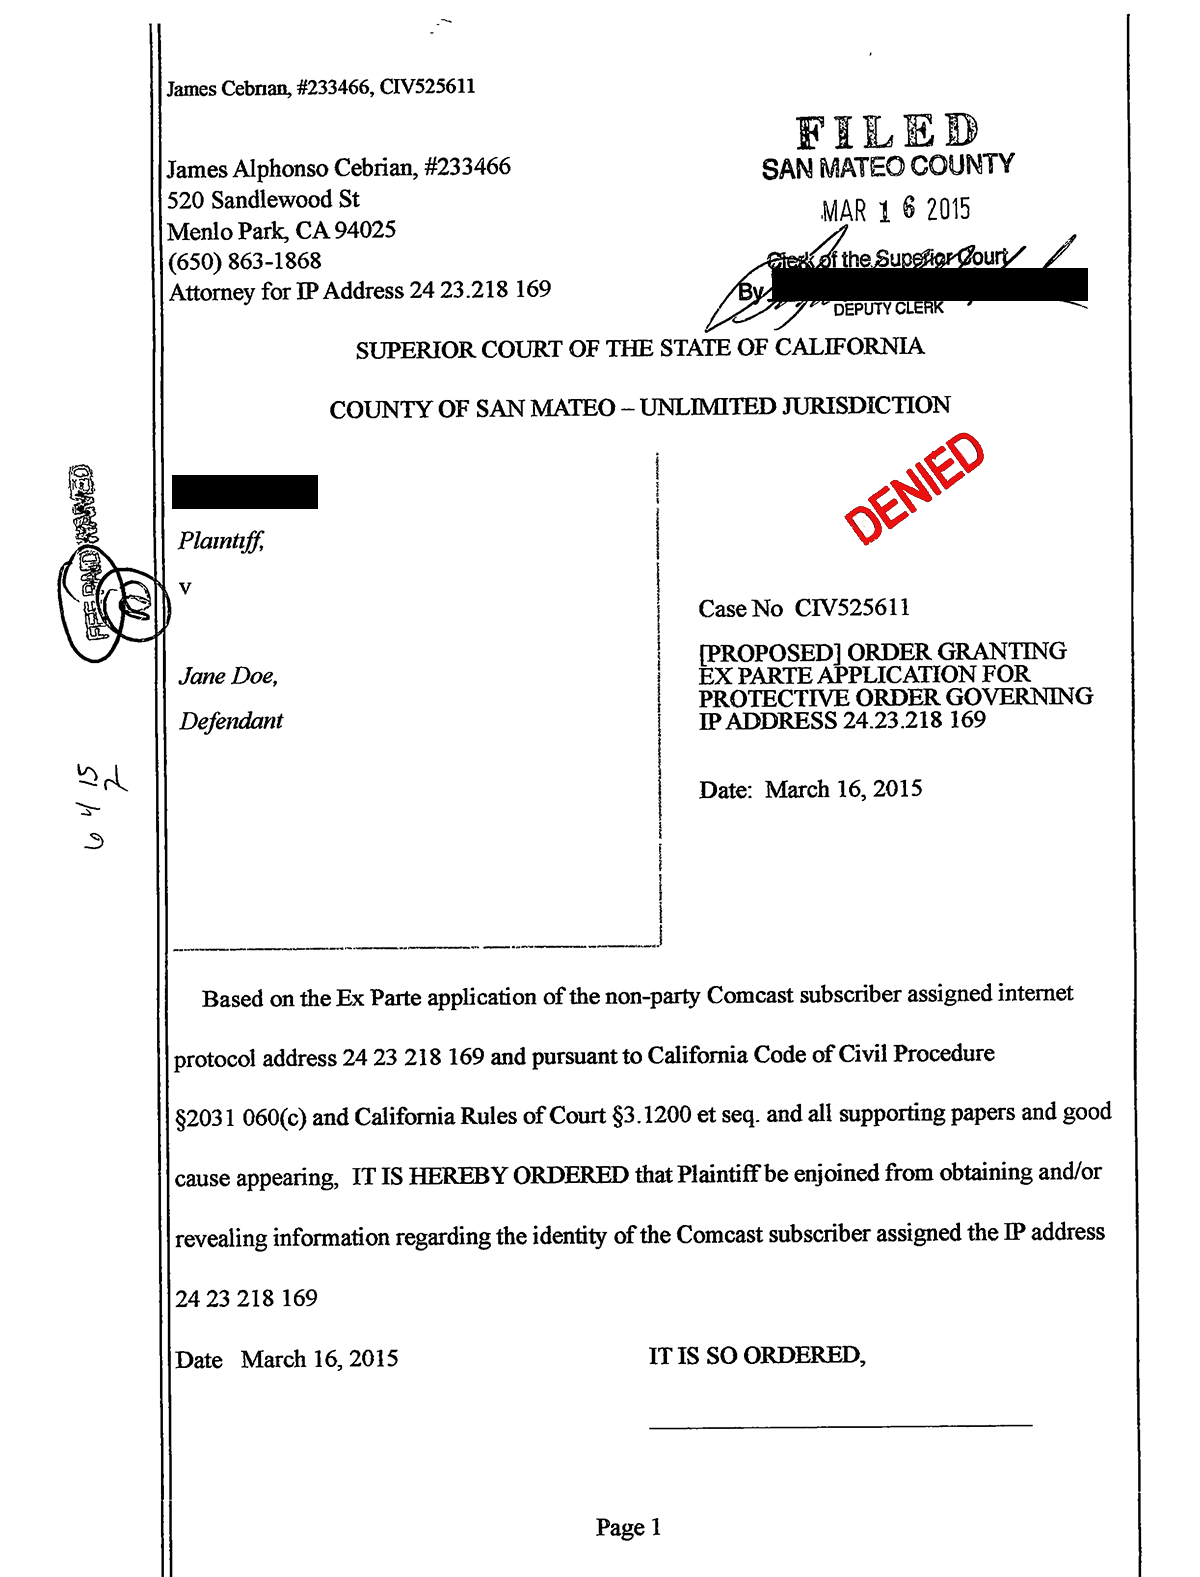 James Cebrian proposed court order was denied by San Mateo County Superior Court